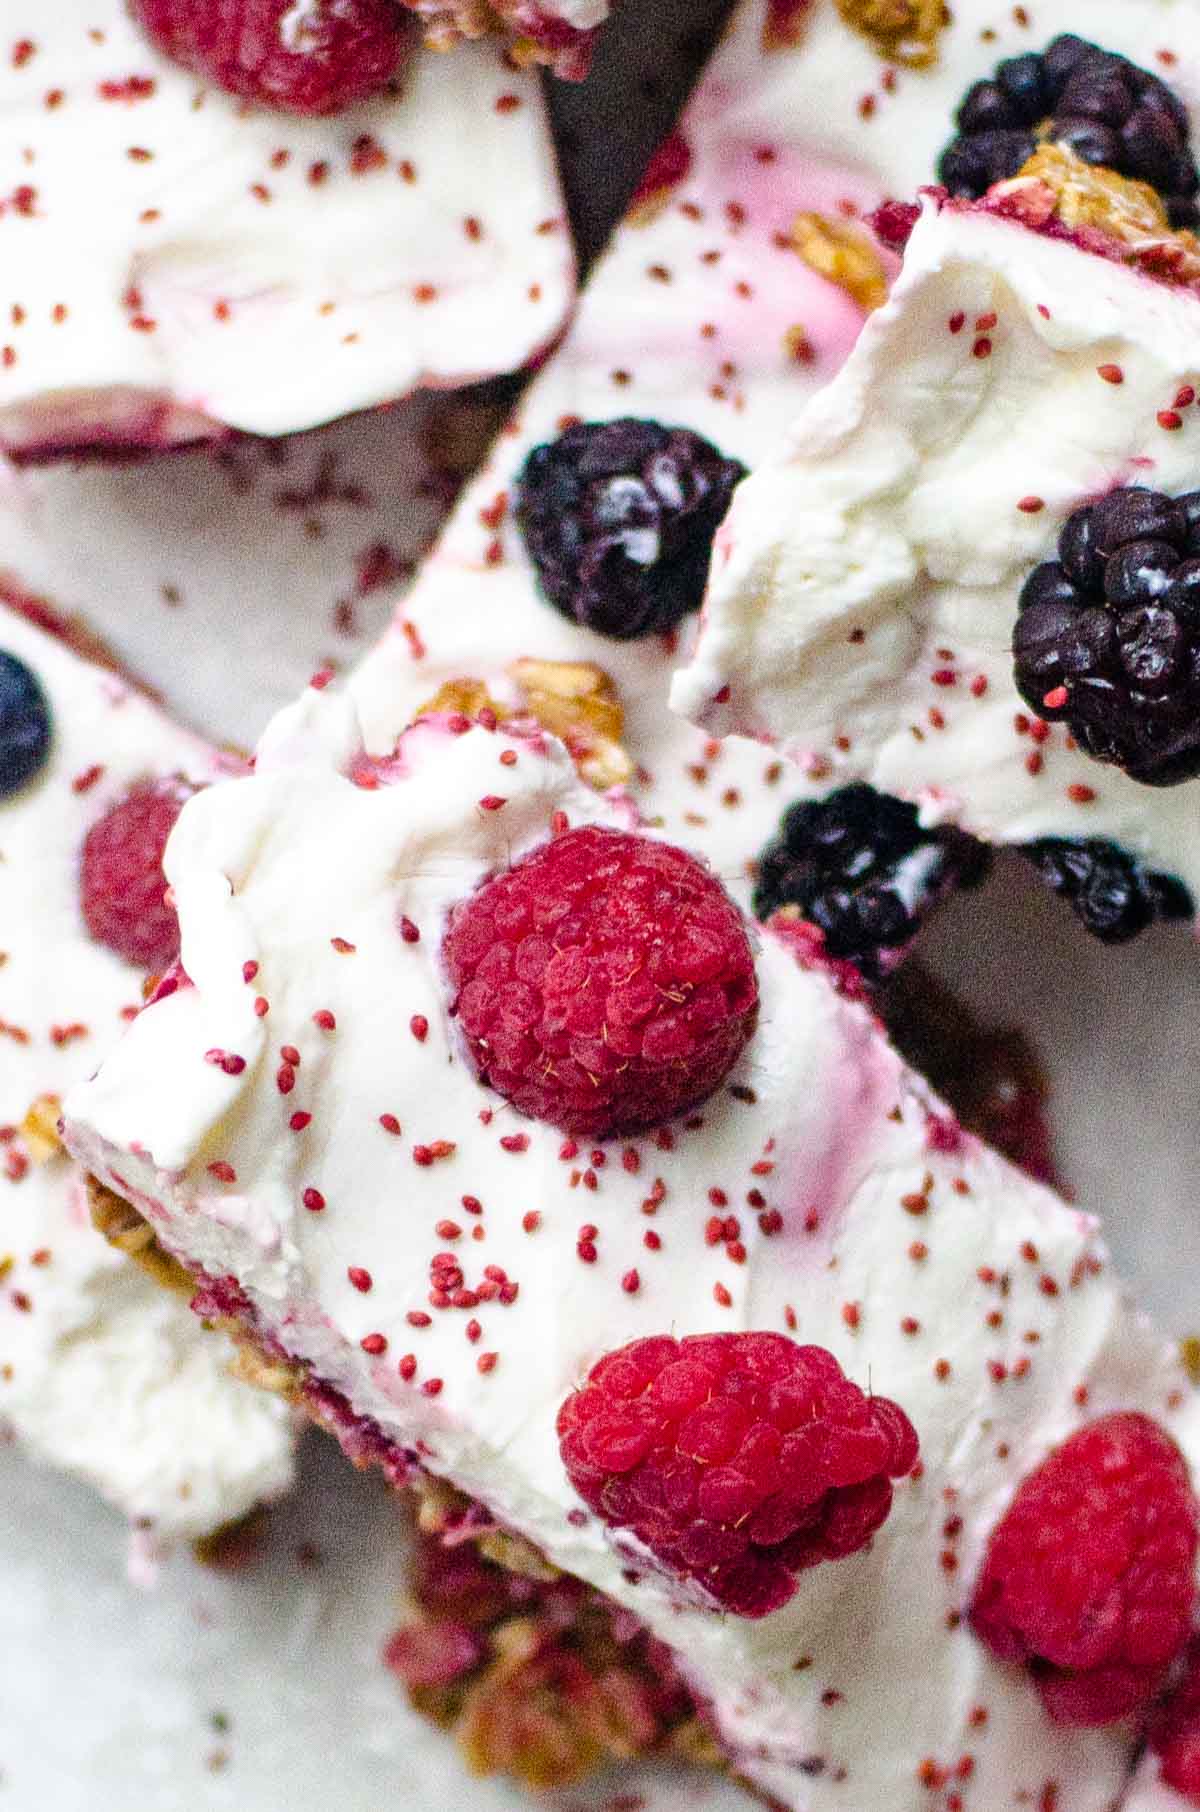 Stacked frozen yogurt bars with fresh berries and cranberry seeds on top.